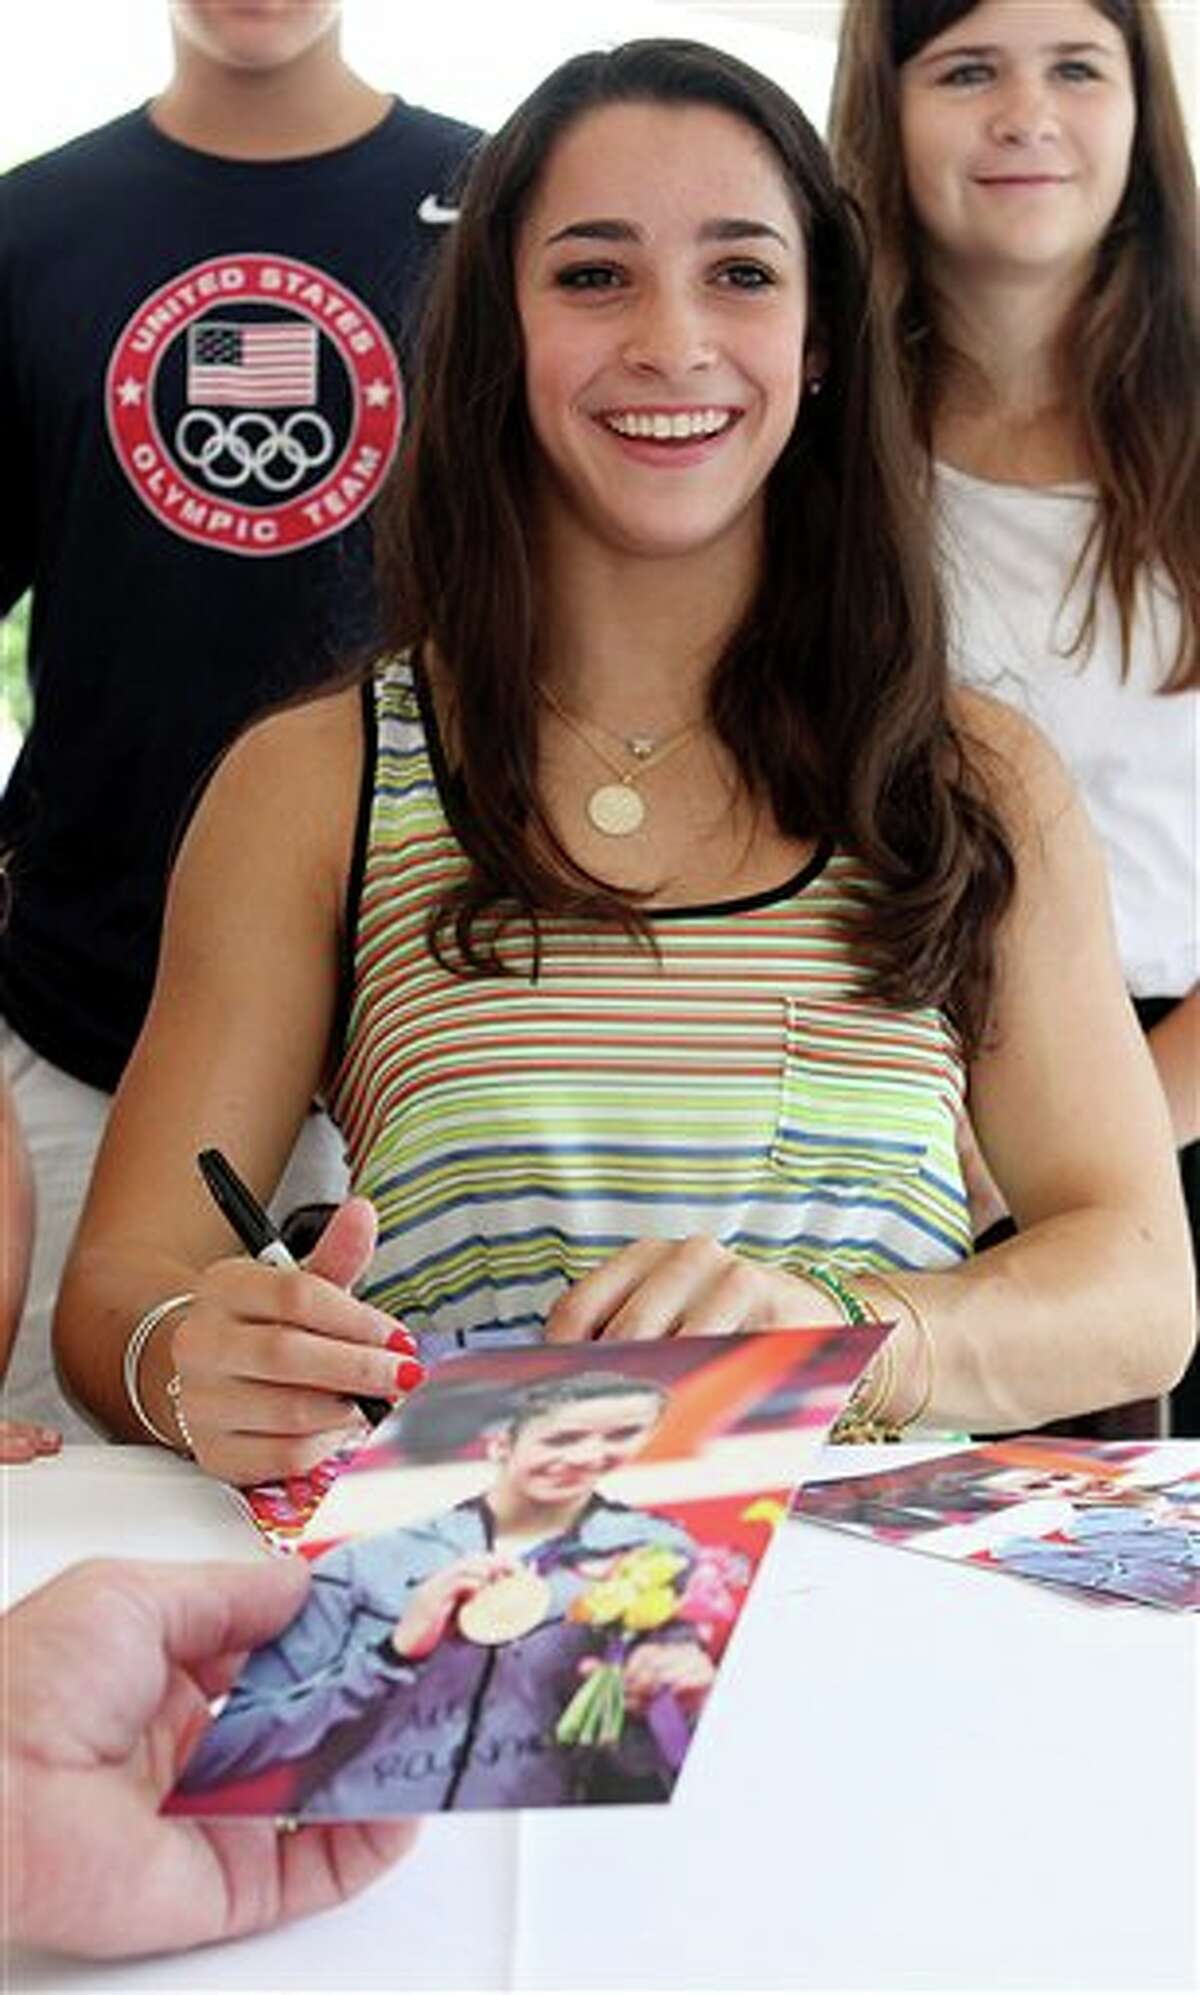 Olympic gold medal-winning gymnast Aly Raisman, right, signs autographs during a visit to Brestyan's American Gymnastics Club, Thursday, Aug. 16, 2012, in Burlington, Mass. Hundreds of children and parents and even a pony turned out Thursday to welcome Raisman back to the gym where she trains. (AP Photo/The Boston Herald, Angela Rowlings) BOSTON GLOBE OUT; METRO BOSTON OUT; MAGS OUT; ONLINE OUT